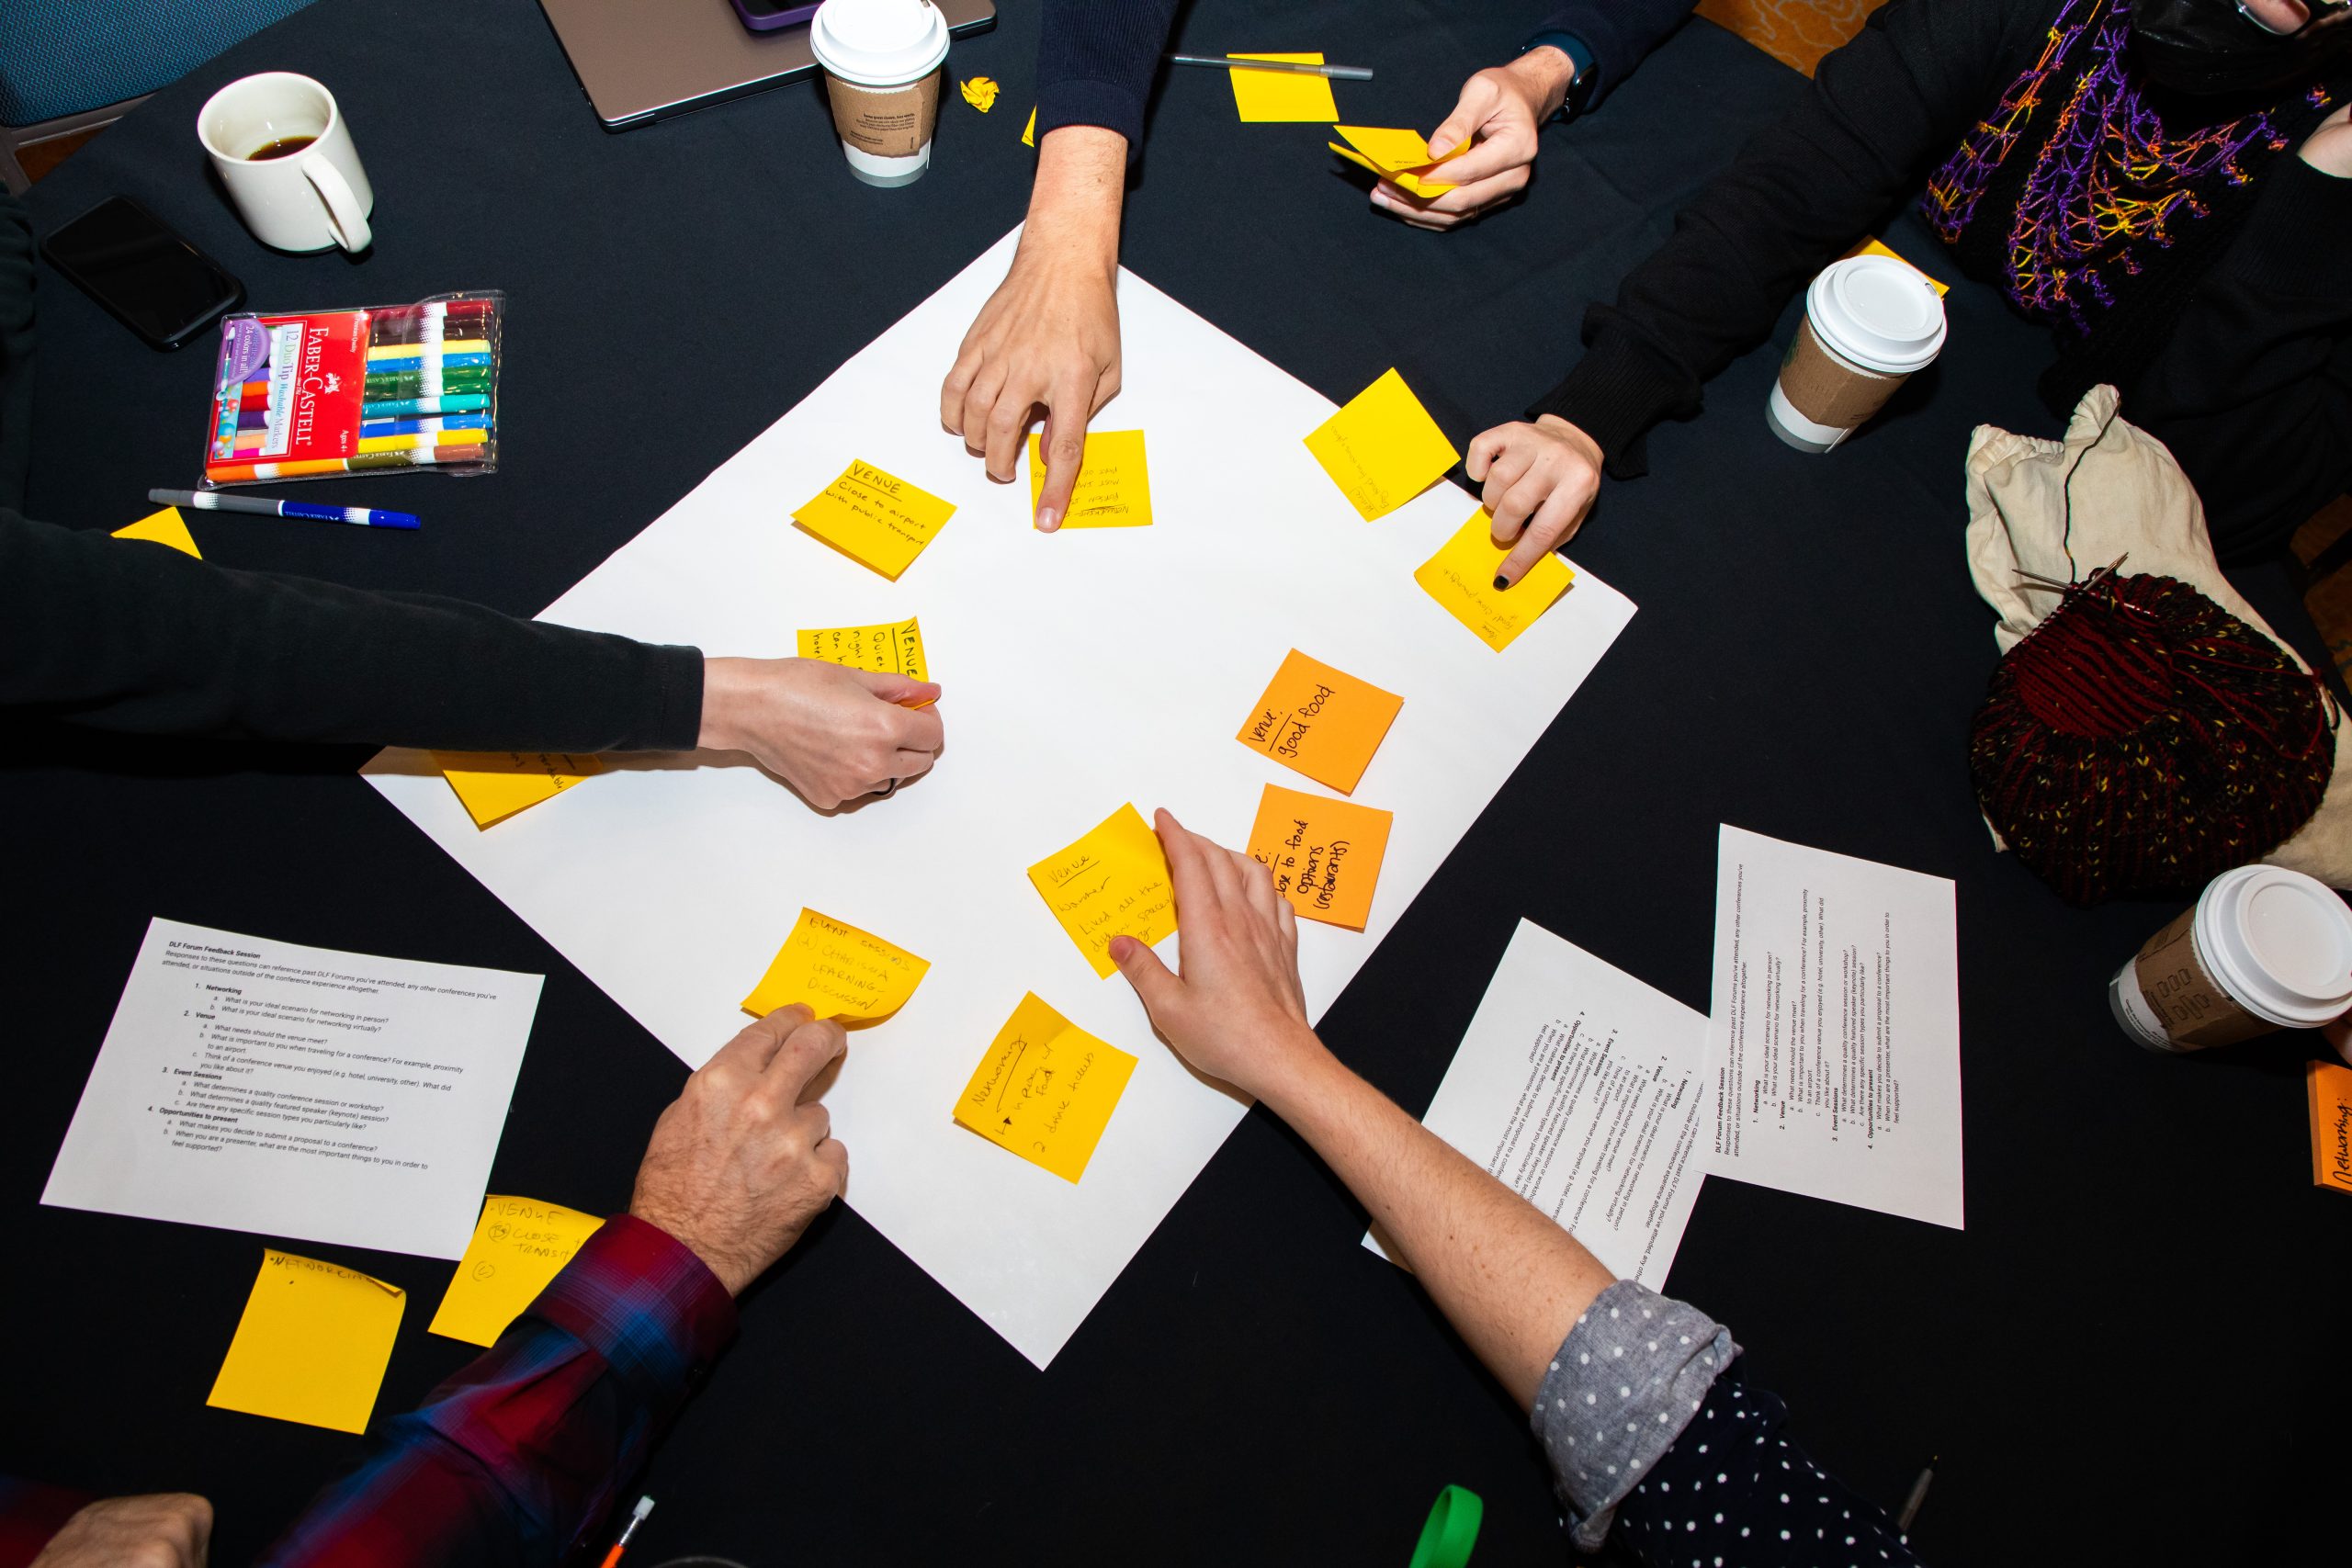 Birds eye view of a table with a large post-it note with smaller post-it notes on it; showing hands touching the large and small post-it notes